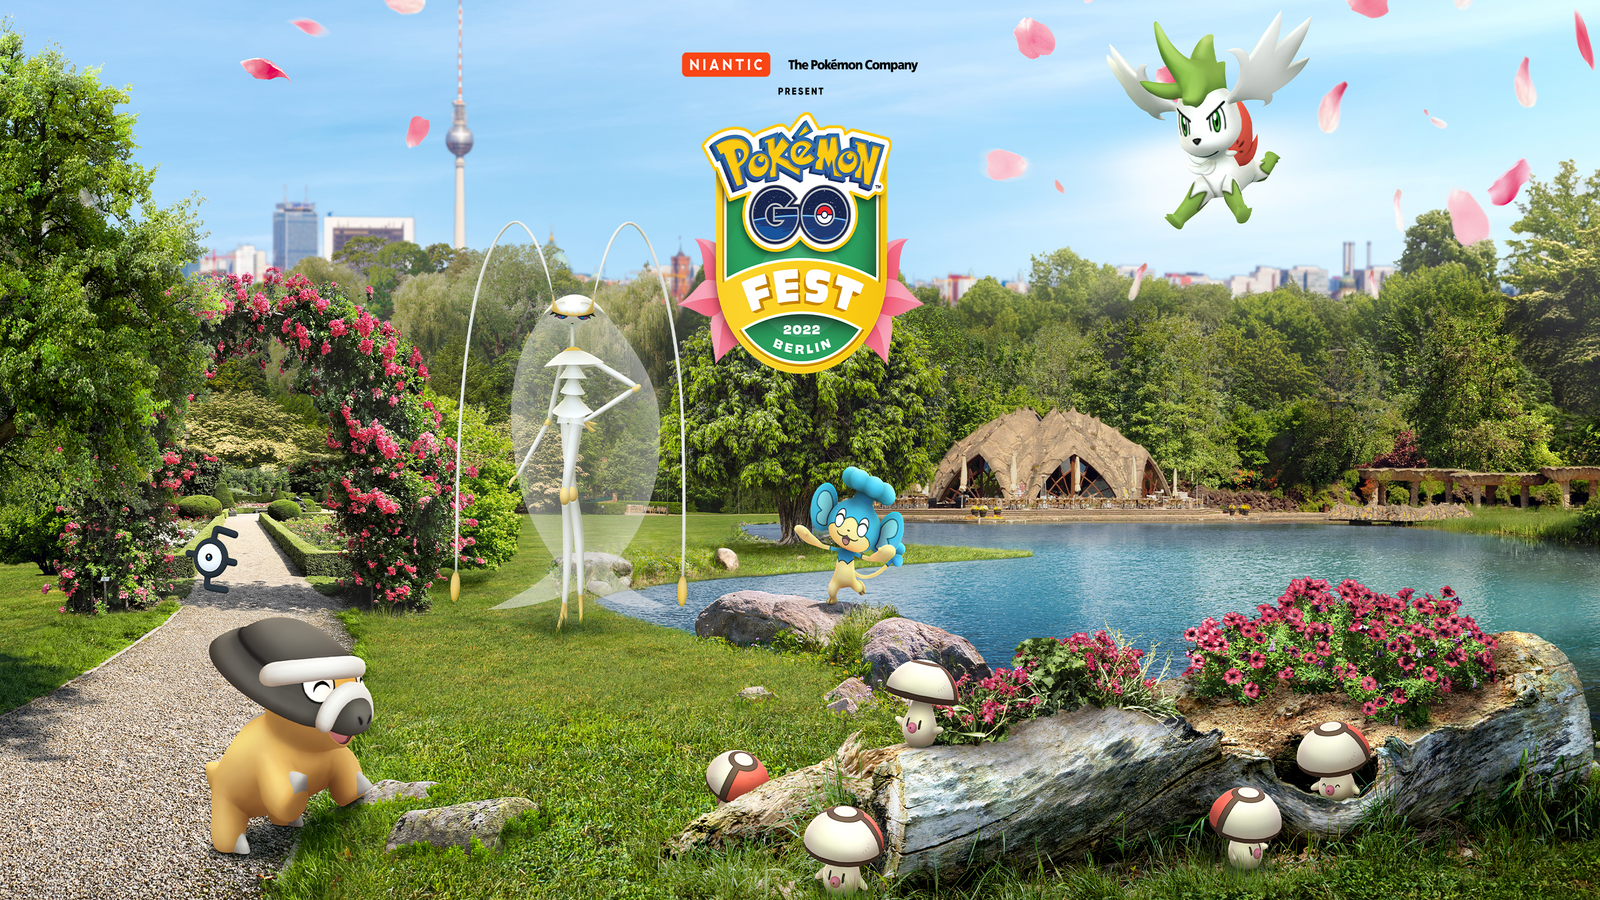 Pokémon Go' Fest 2022 Finale will make Ultra Beasts available globally